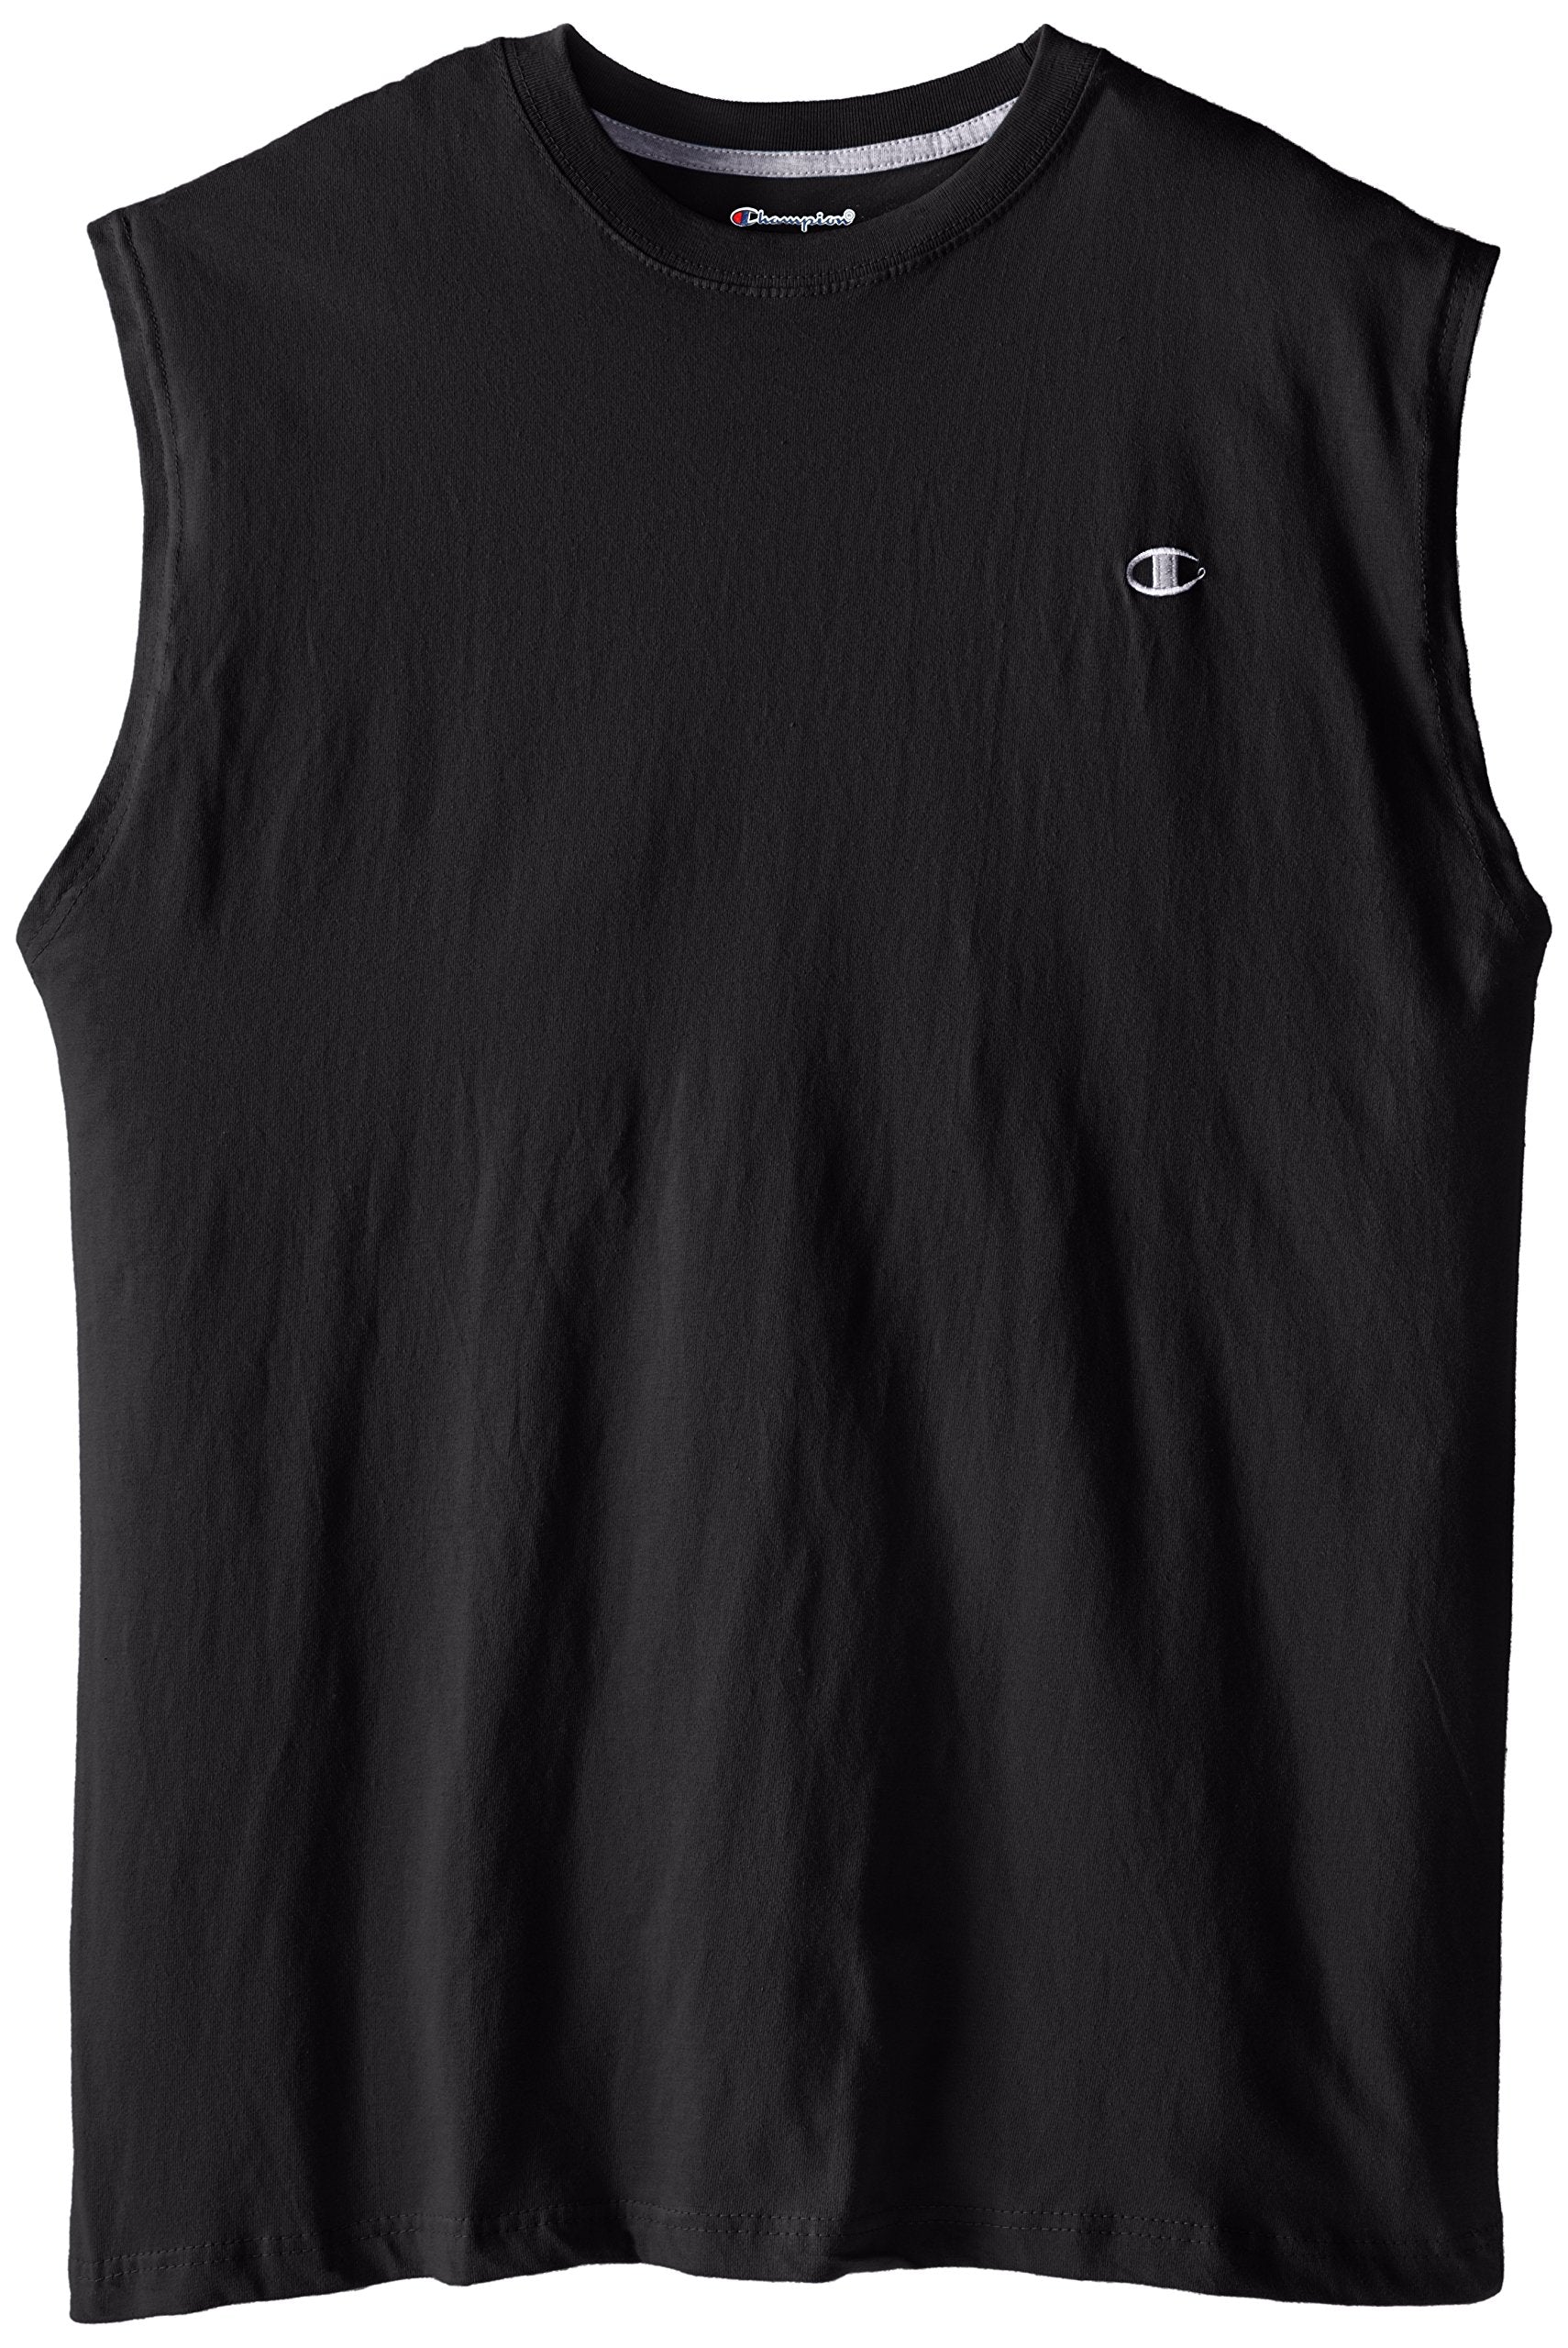 Champion Big & Tall Jersey Muscle T-Shirt for Men